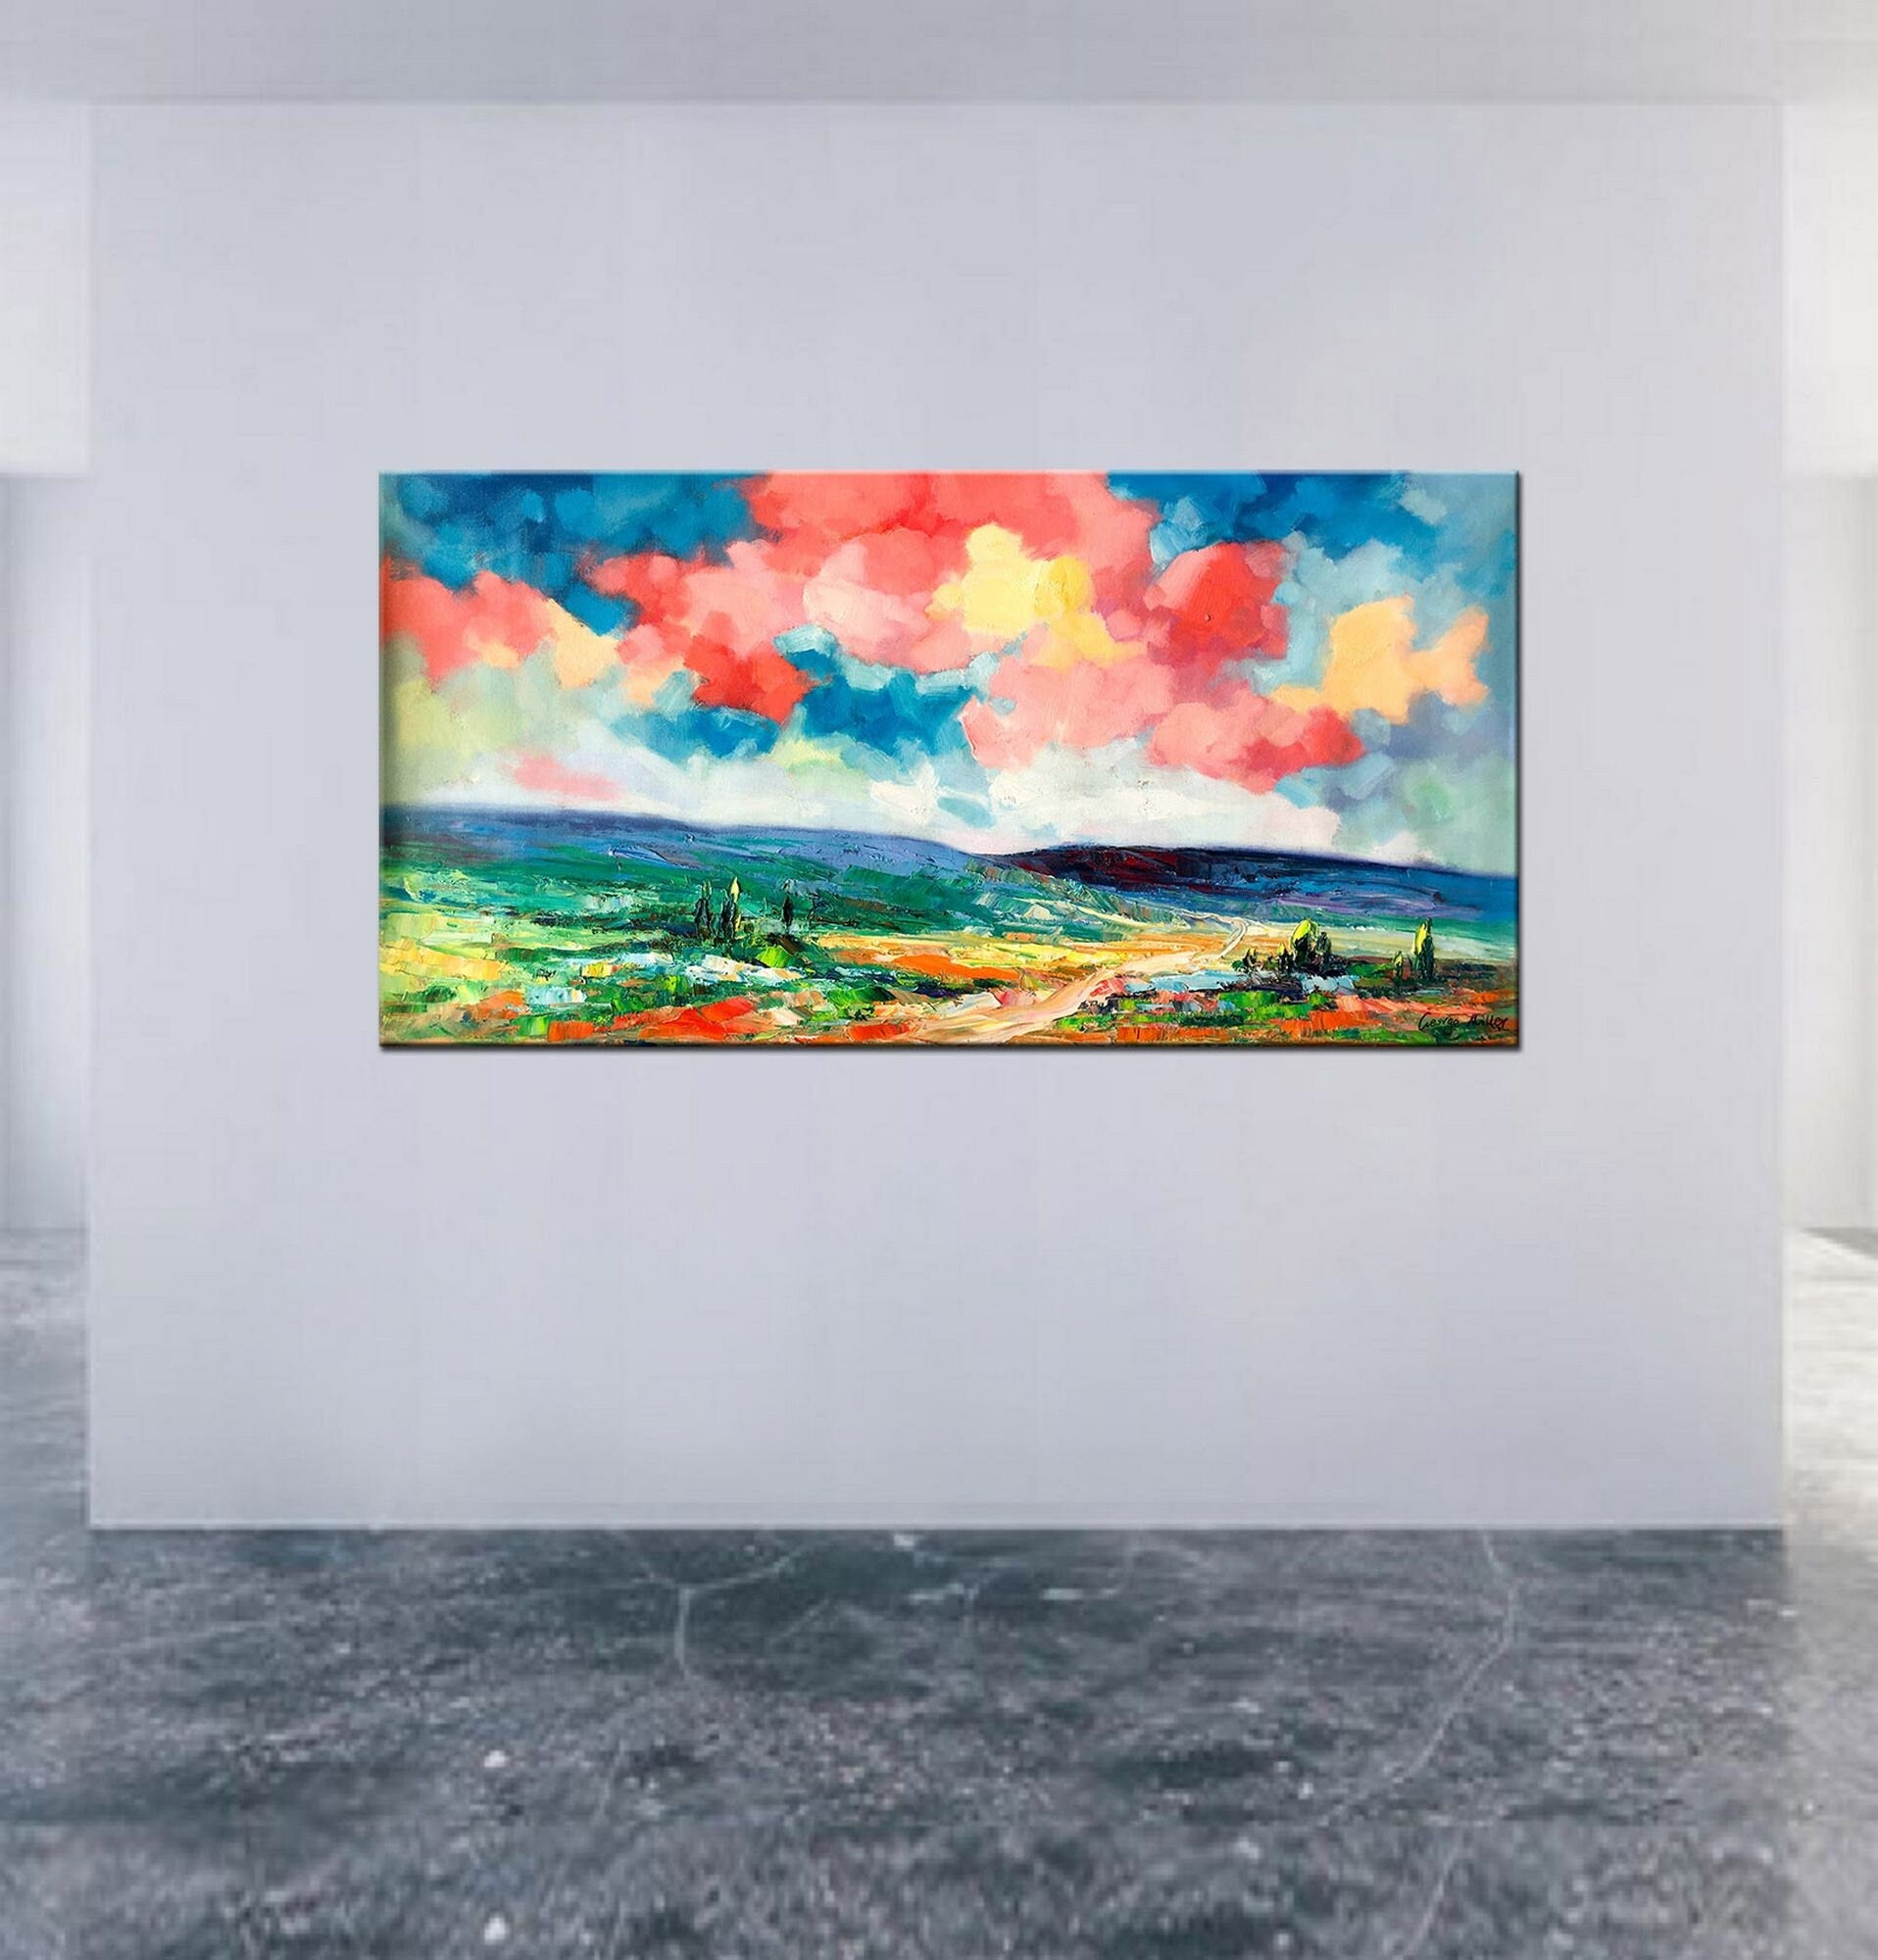 Large Oil Painting, Original Abstract Art, Large Wall Art Painting, Abstract Canvas Painting, Original Oil Painting Landscape, Tuscany Art